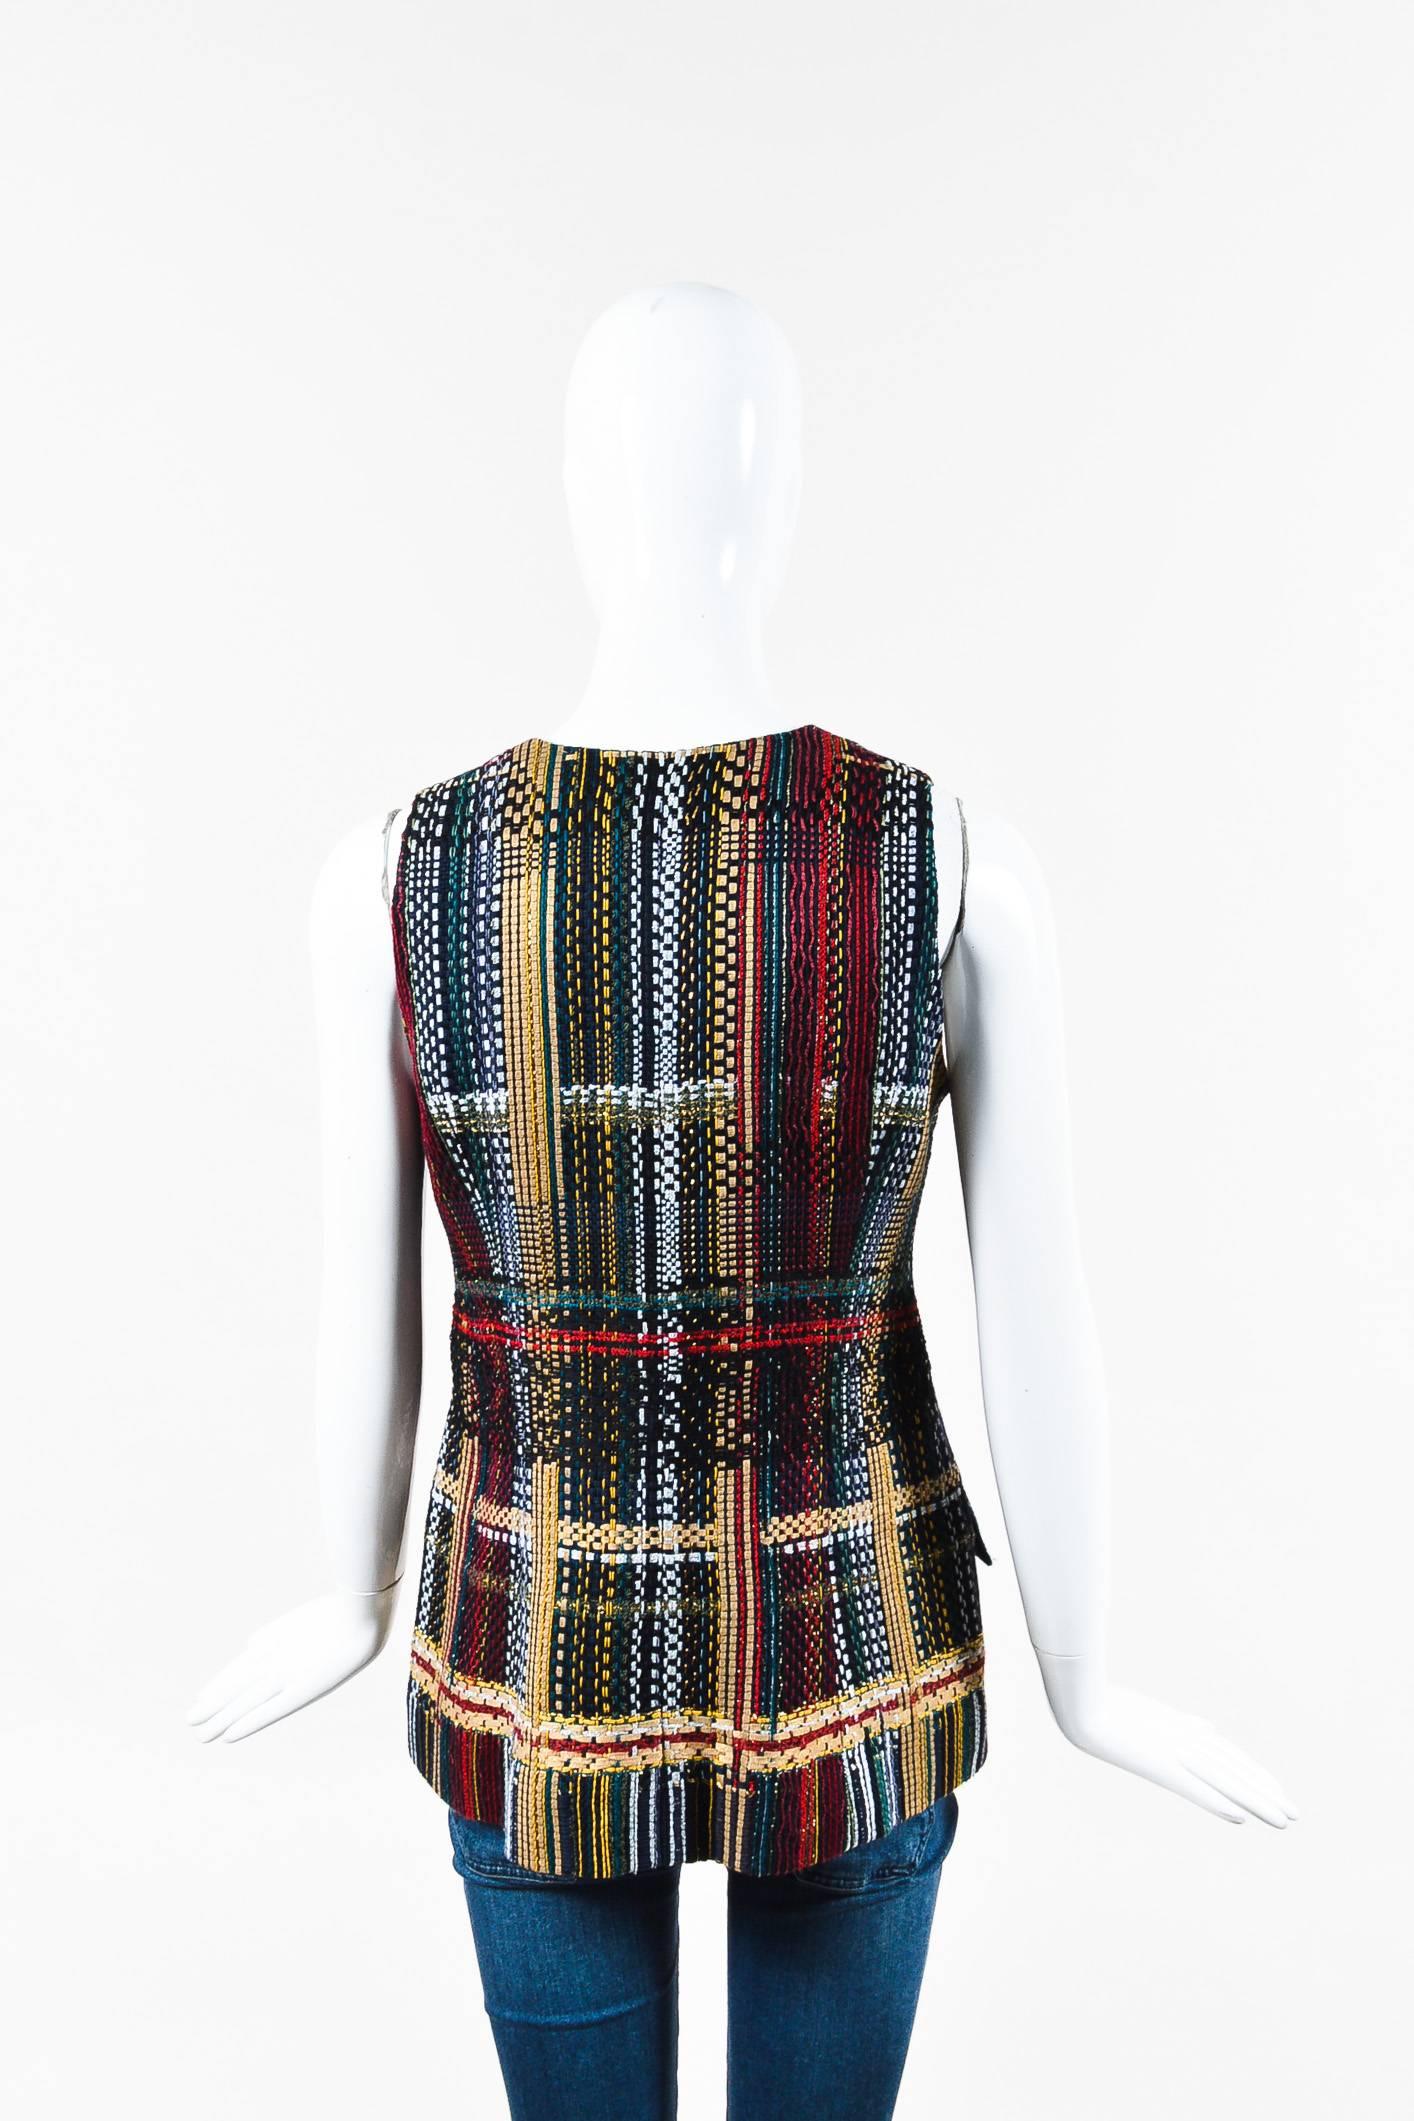 Multicolor tweed, sleeveless v-neck vest by Chanel. Features maroon and gold-tone floral buttons along front. Faux front hand pockets. Beige silk lining. As seen in the Dubai Resort Collection on the 2015 Runway.

Additional measurements: Waist